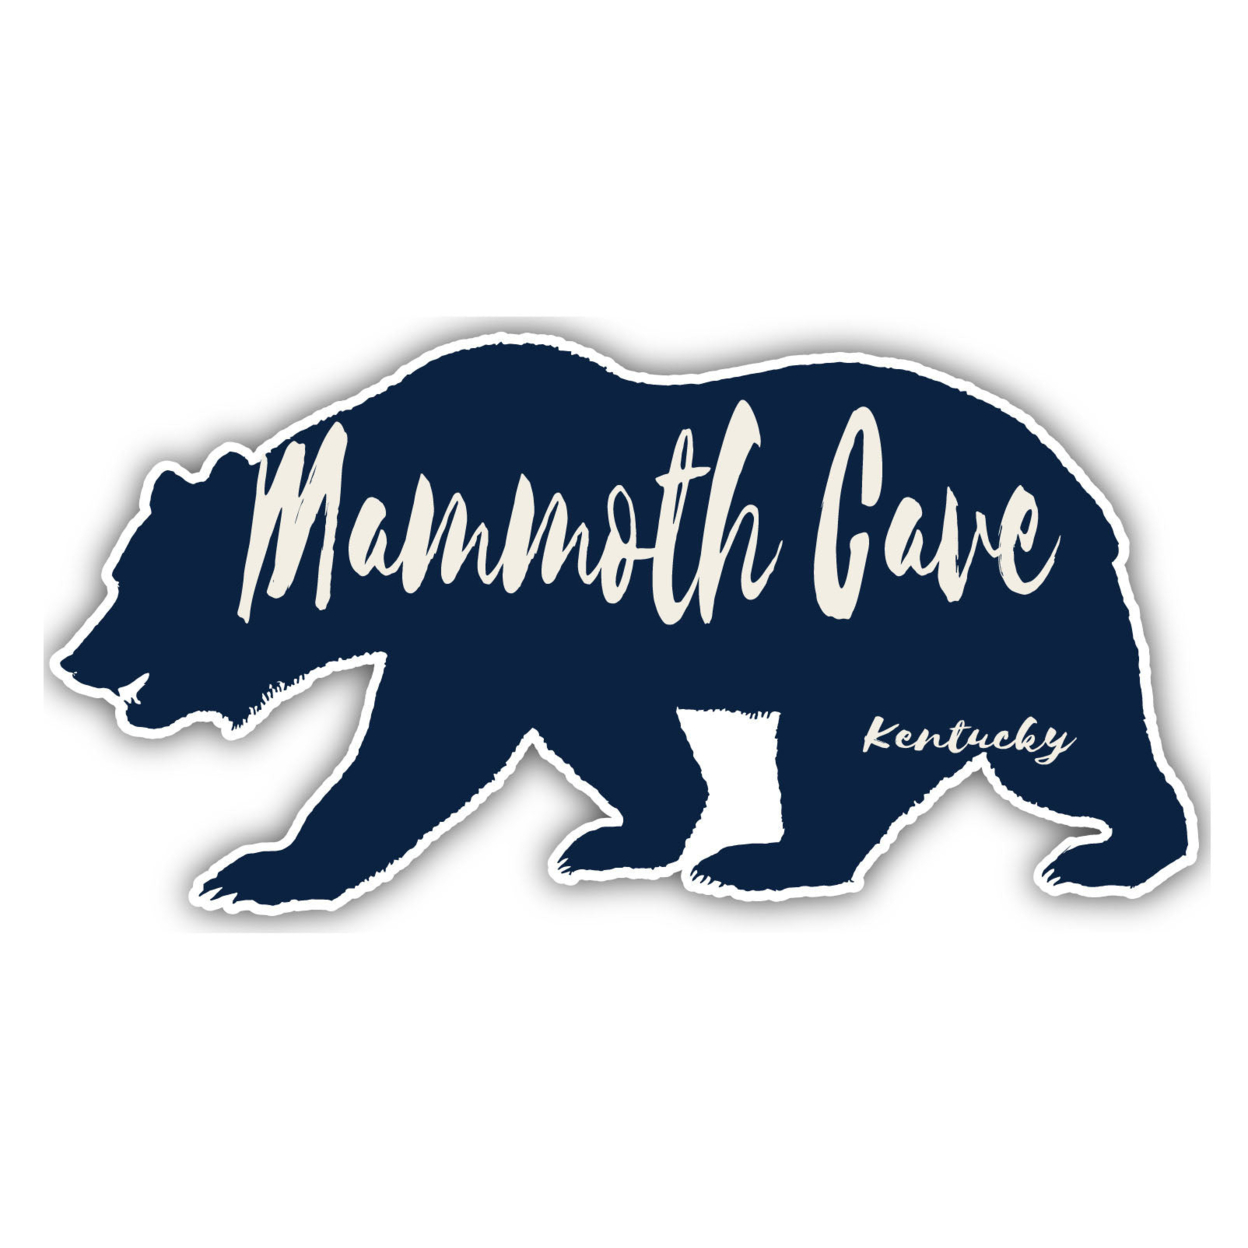 Mammoth Cave Kentucky Souvenir Decorative Stickers (Choose Theme And Size) - 4-Inch, Adventures Awaits